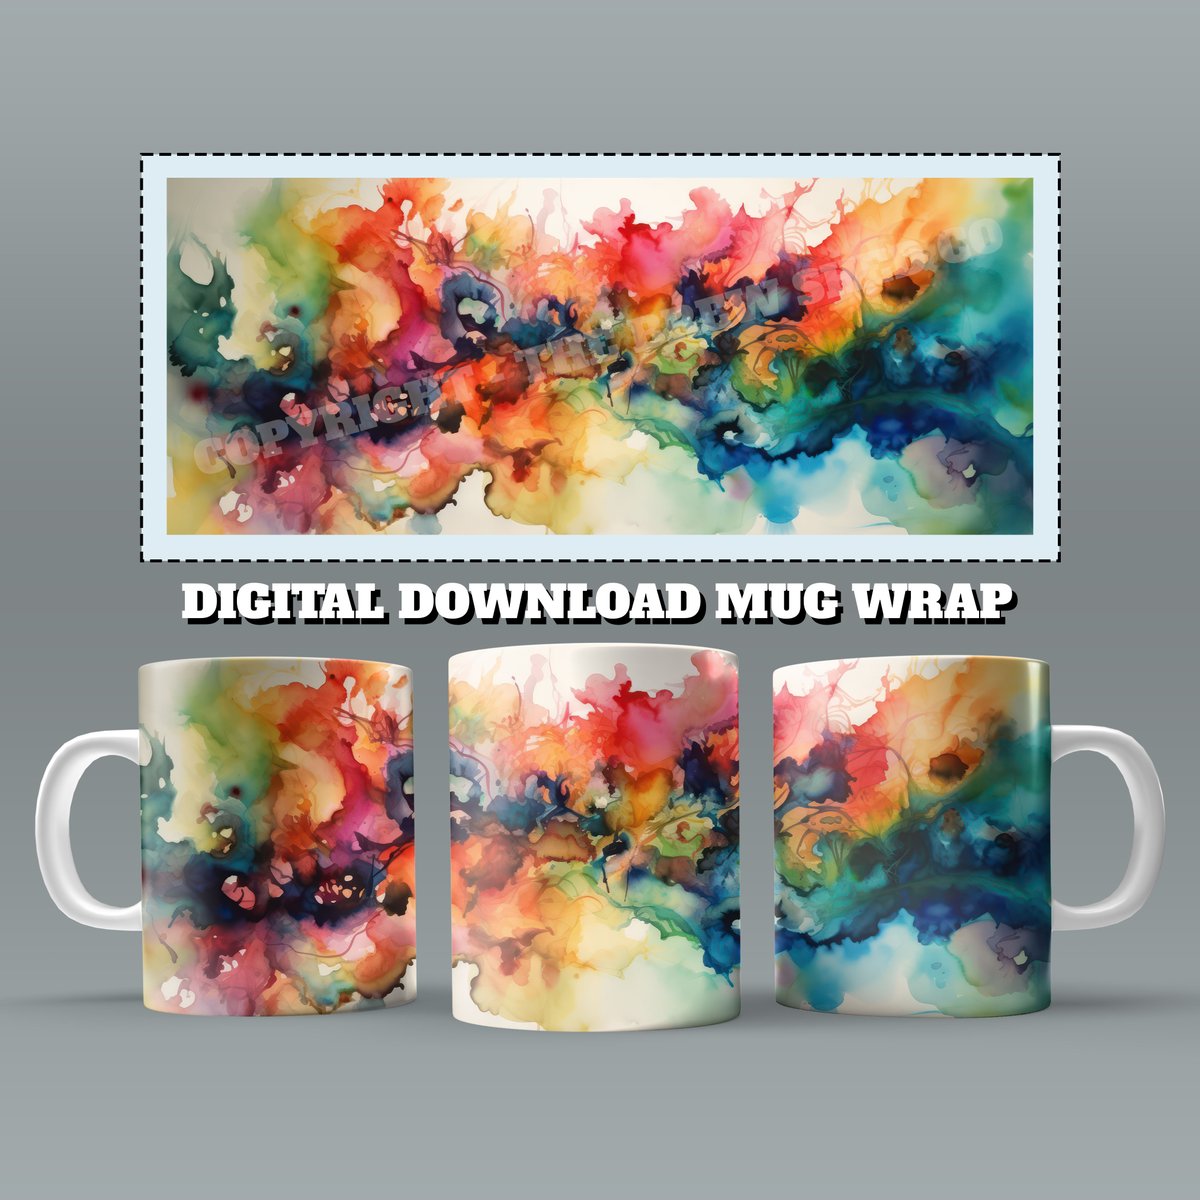 The perfect mug wrap can truly elevate a simple mug to a piece of art. Which design do you prefer, abstract or floral? Reply and let us know! #MugArt #EtsyShop #CustomMugs